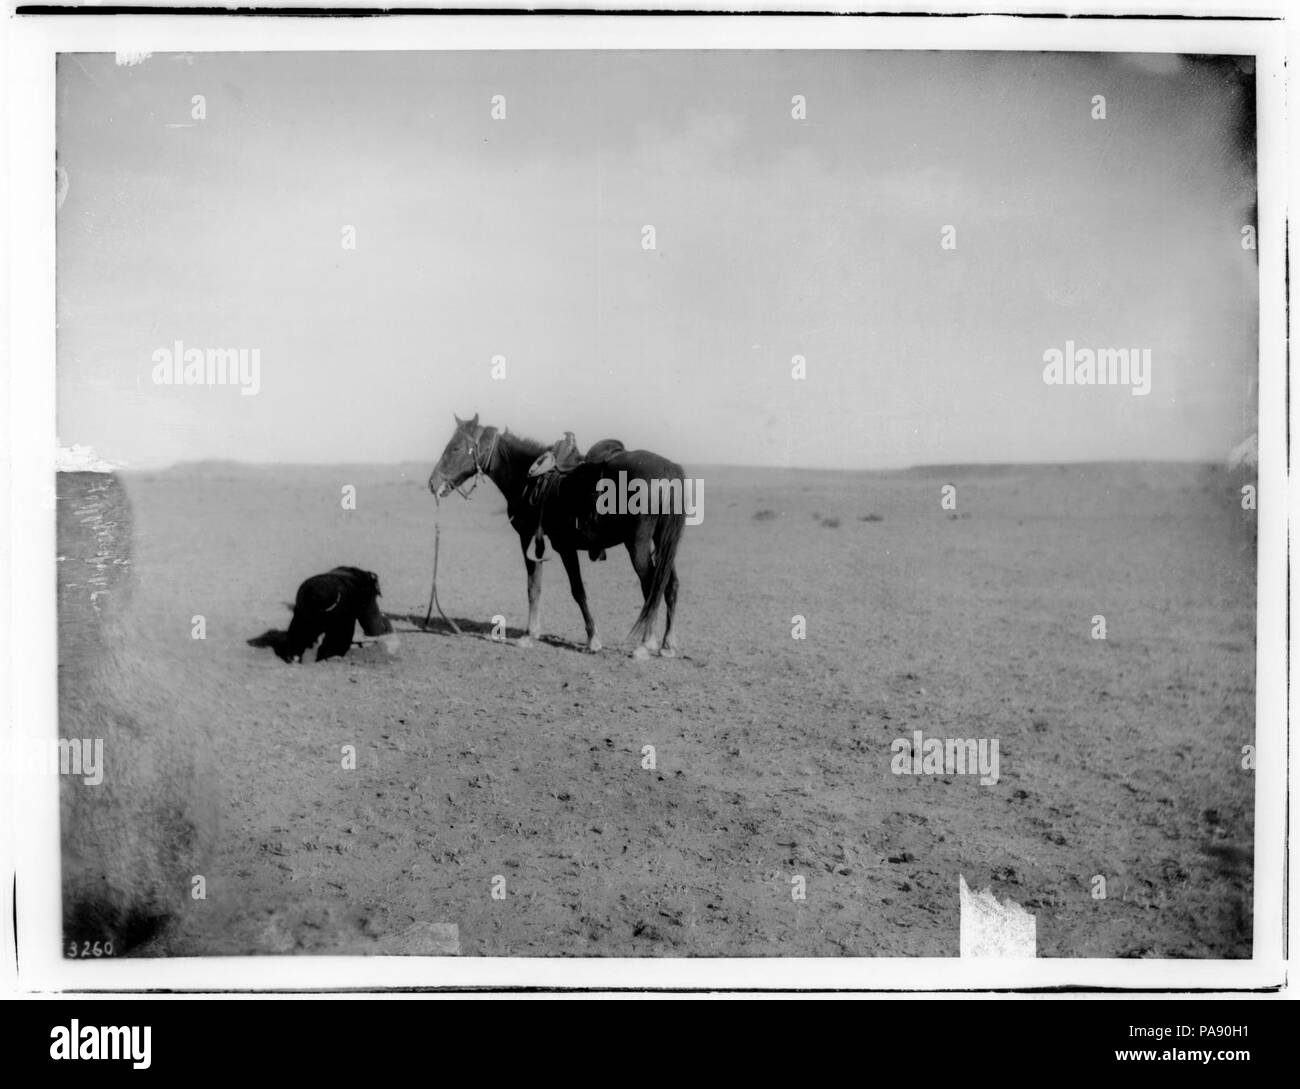 A Navajo Indian man staking his horse to a hole in the desert sand so the horse does not wander off, ca.1900 (CHS-3260). Stock Photo